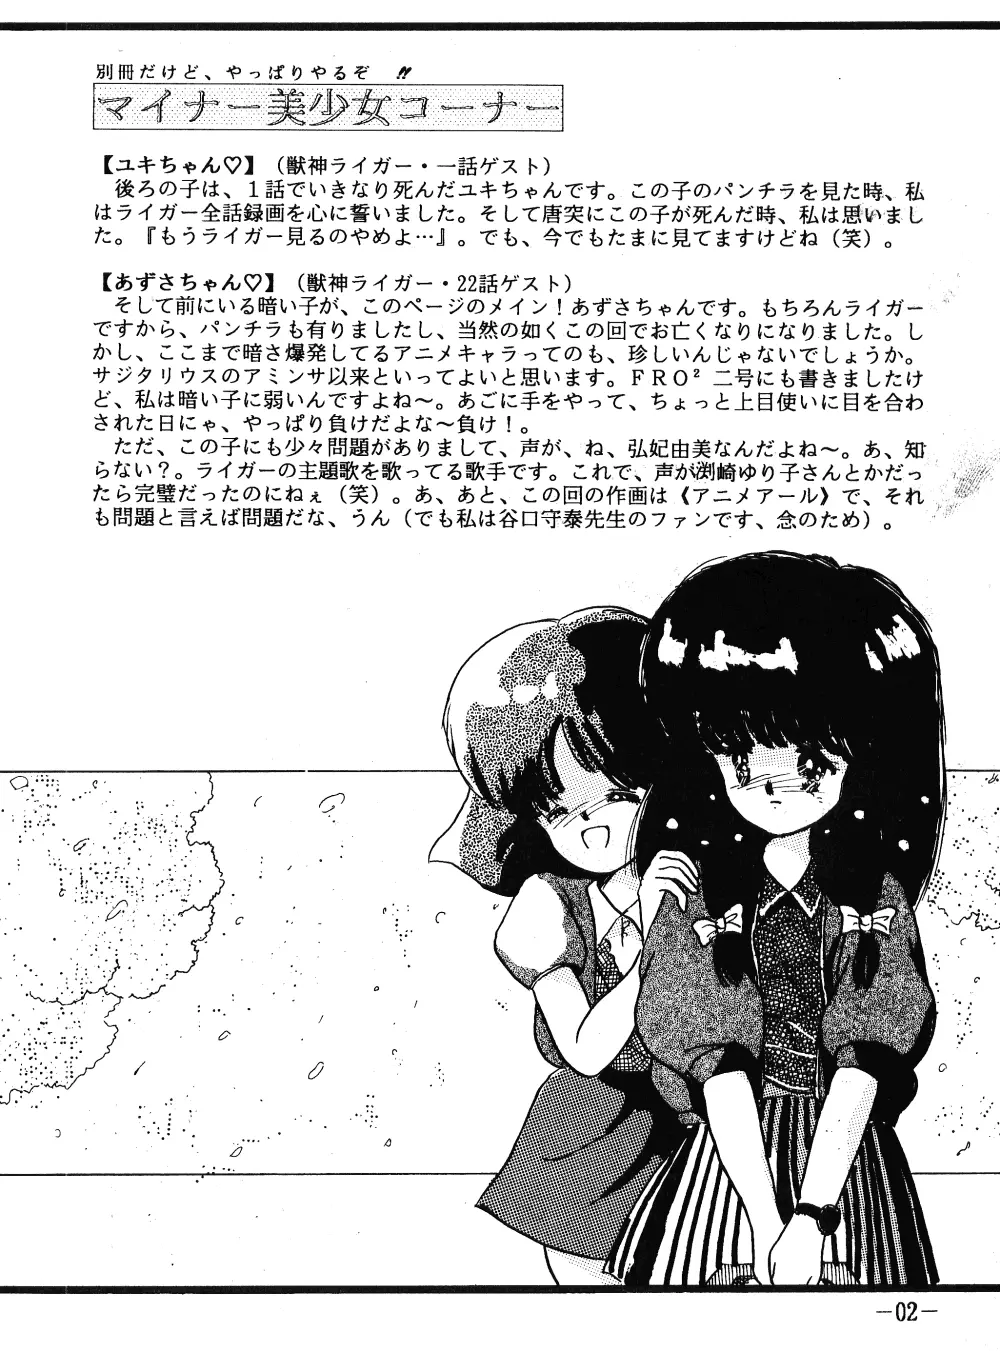 Fro2 Fight Vol. 1 Page.2